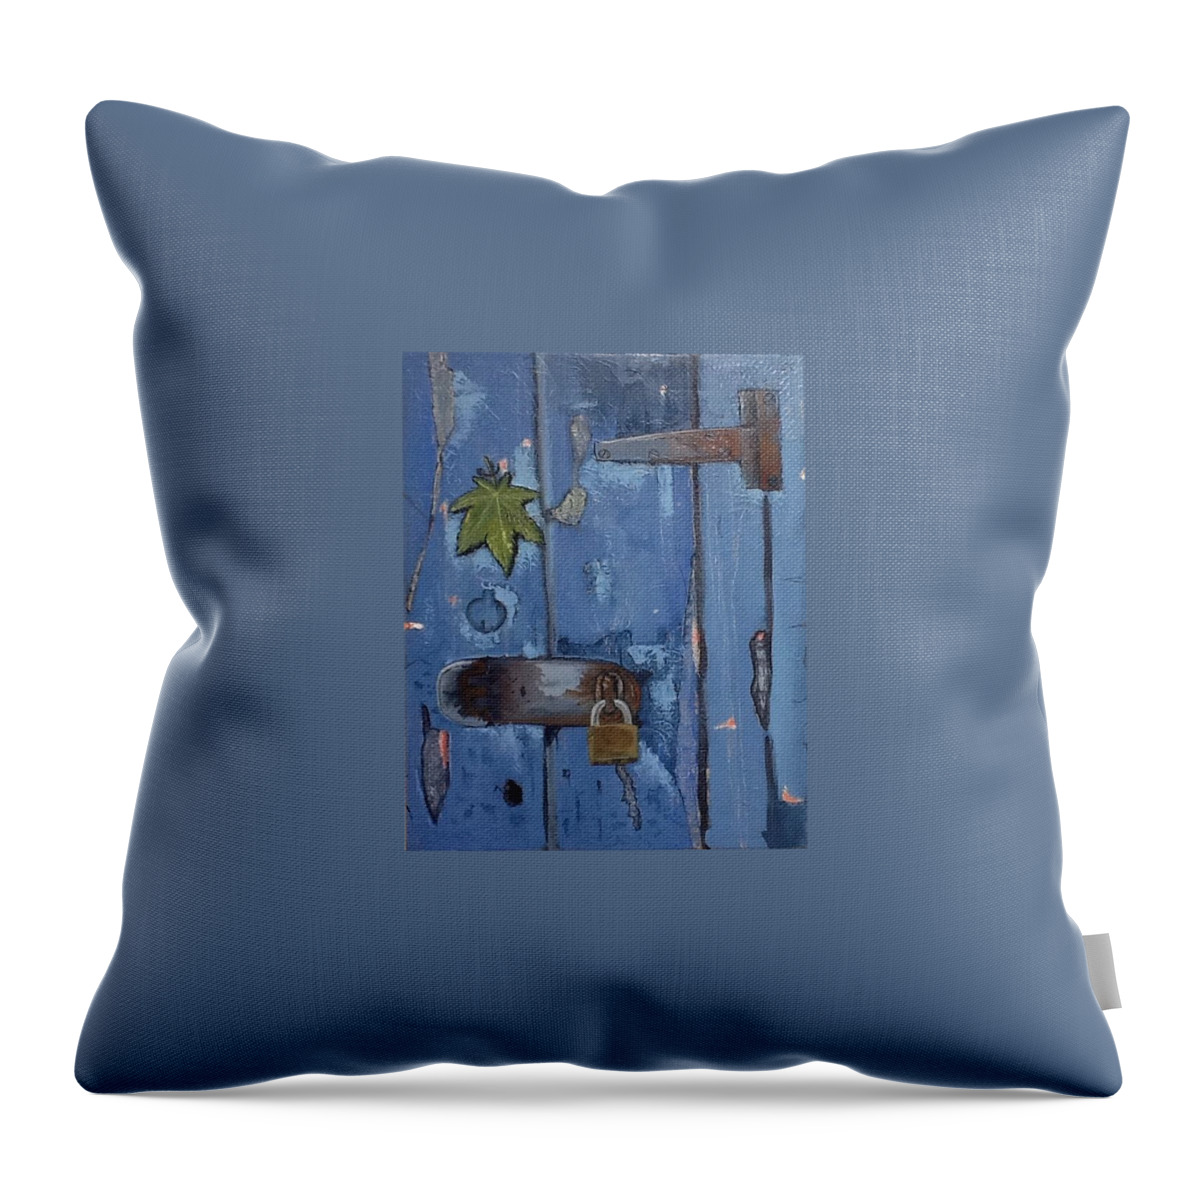  Throw Pillow featuring the painting Closed Doors by Carlos Rodriguez